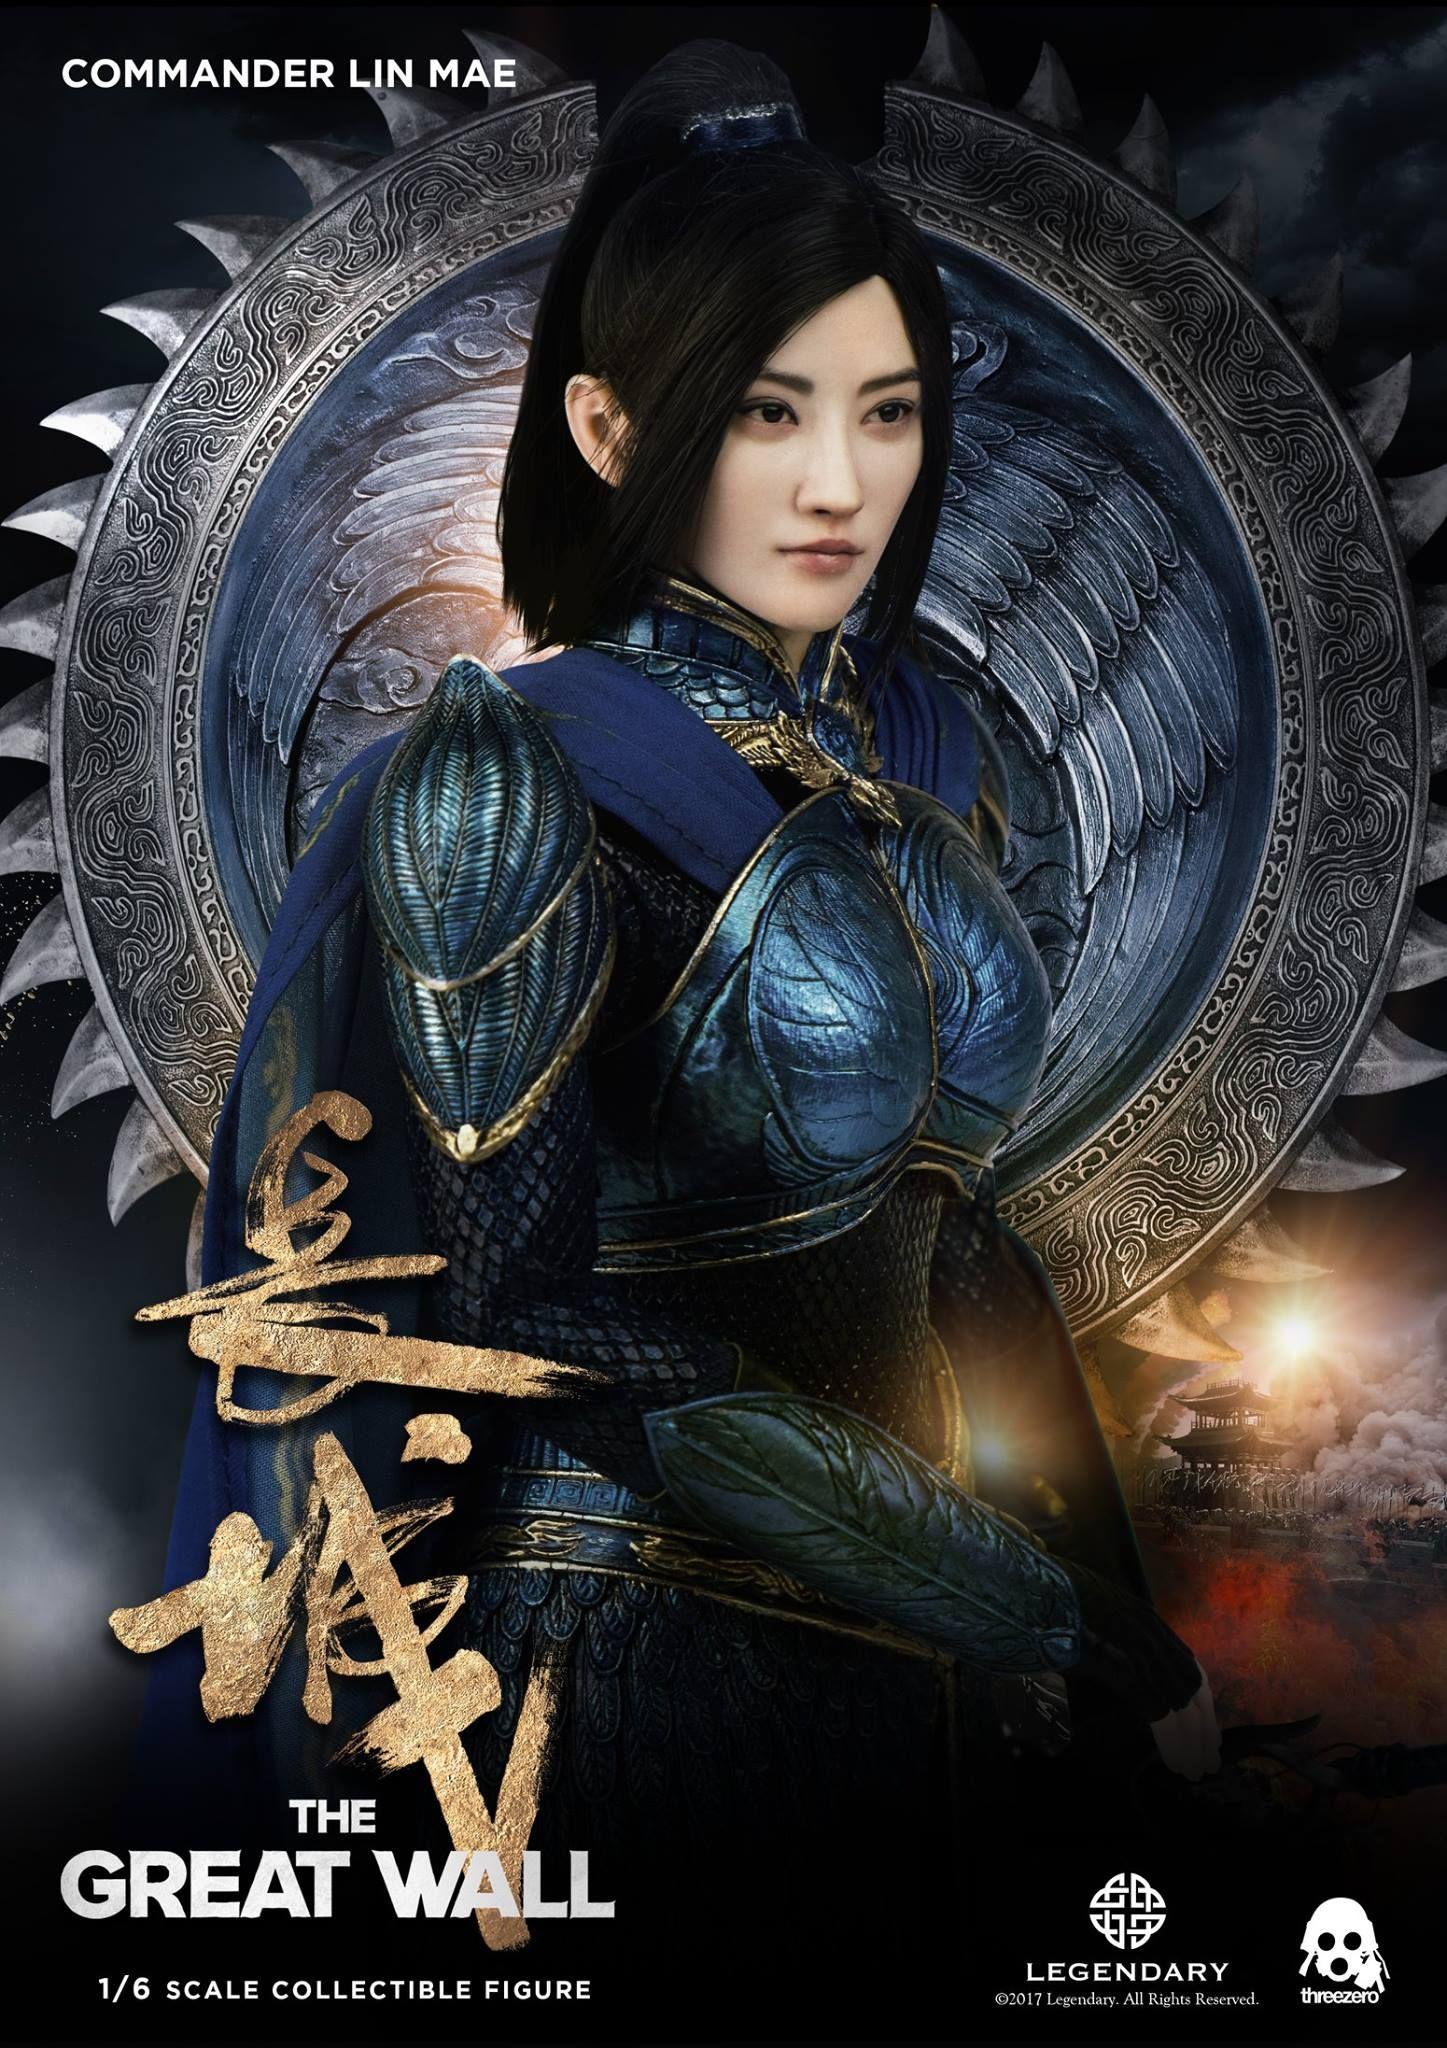 the great wall movie, lin mae. The Great Wall